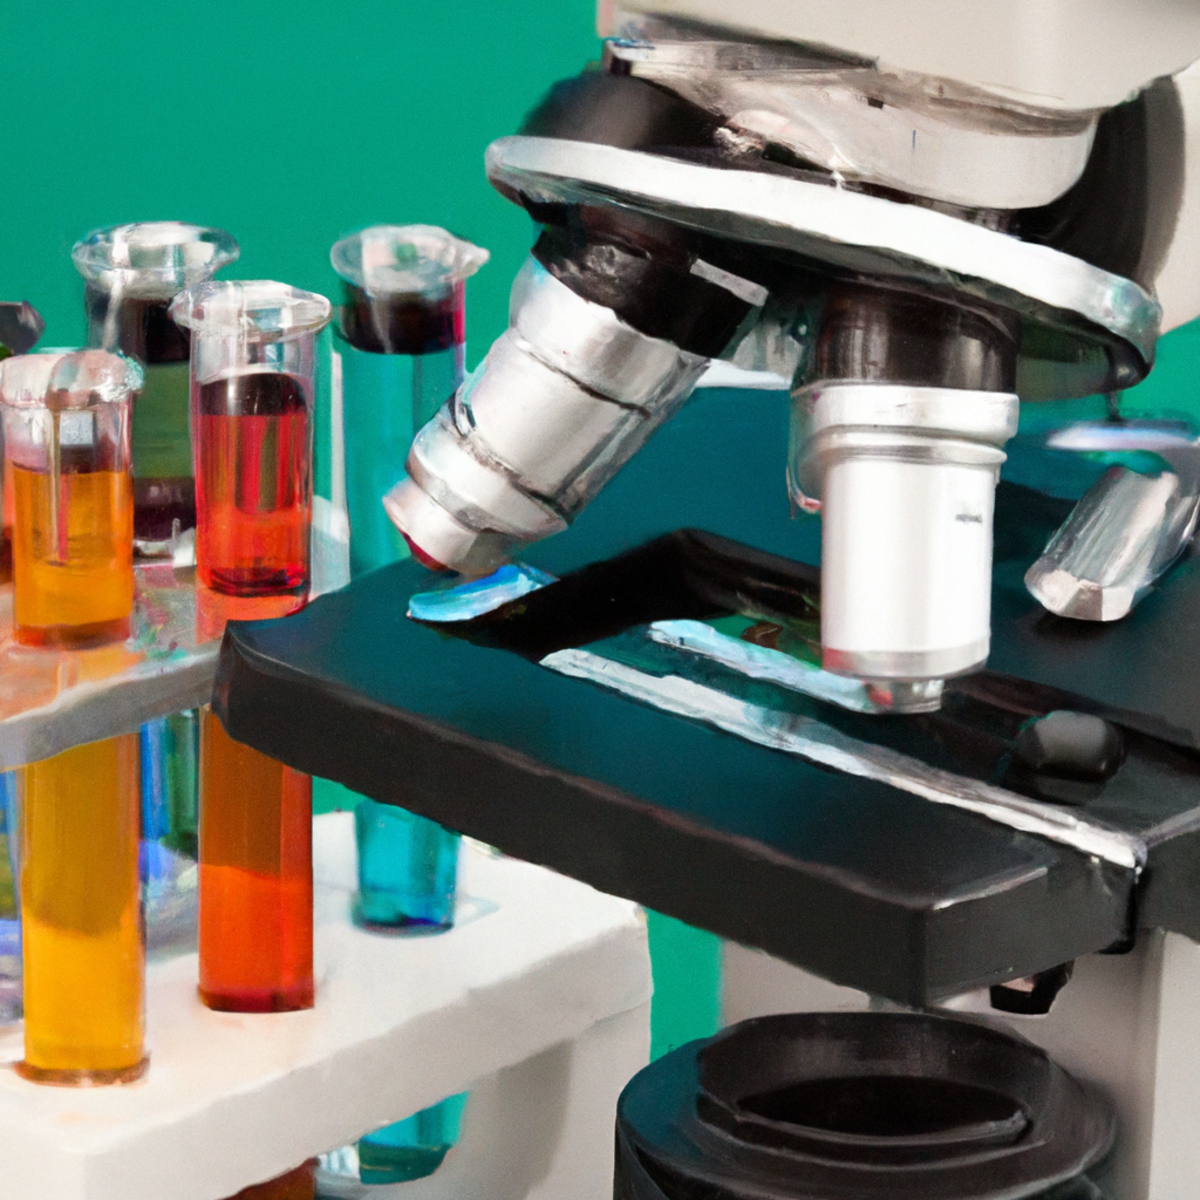 Scientific lab setup with microscope, instruments, and colorful substances, reflecting meticulous research on Zollinger-Ellison Syndrome.